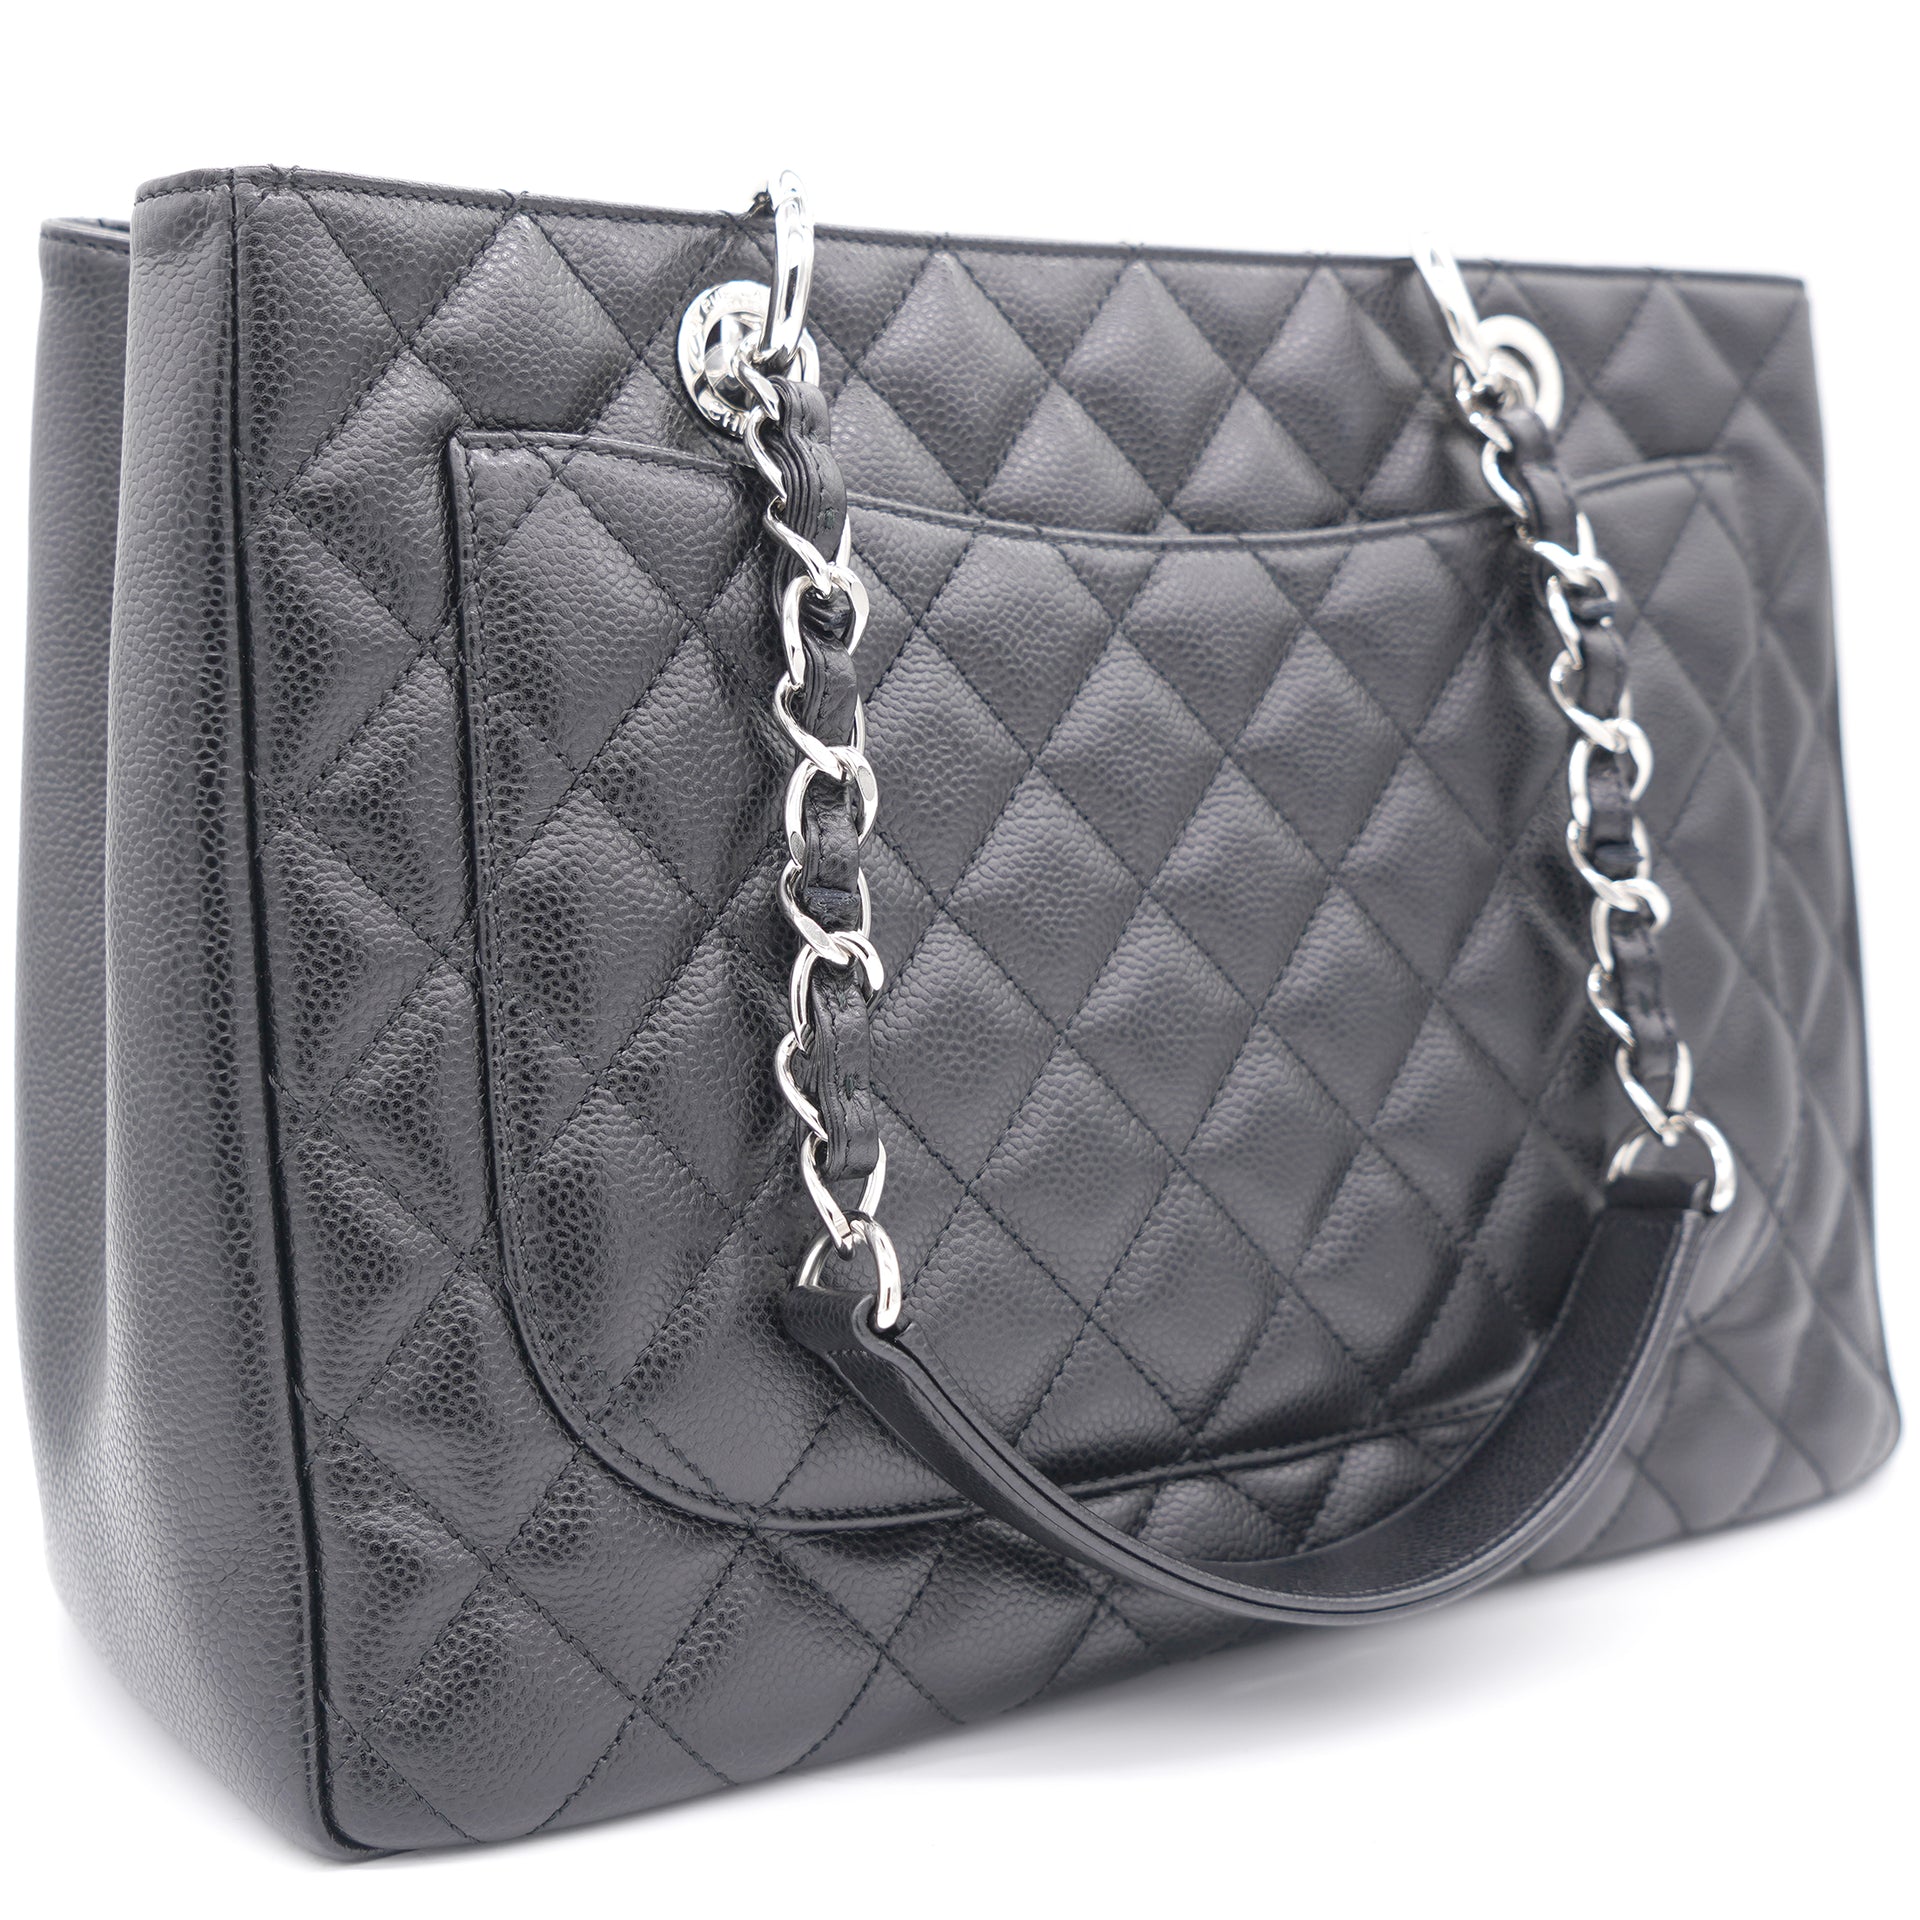 Black Quilted Caviar Leather Grand GST Shopper Tote Bag